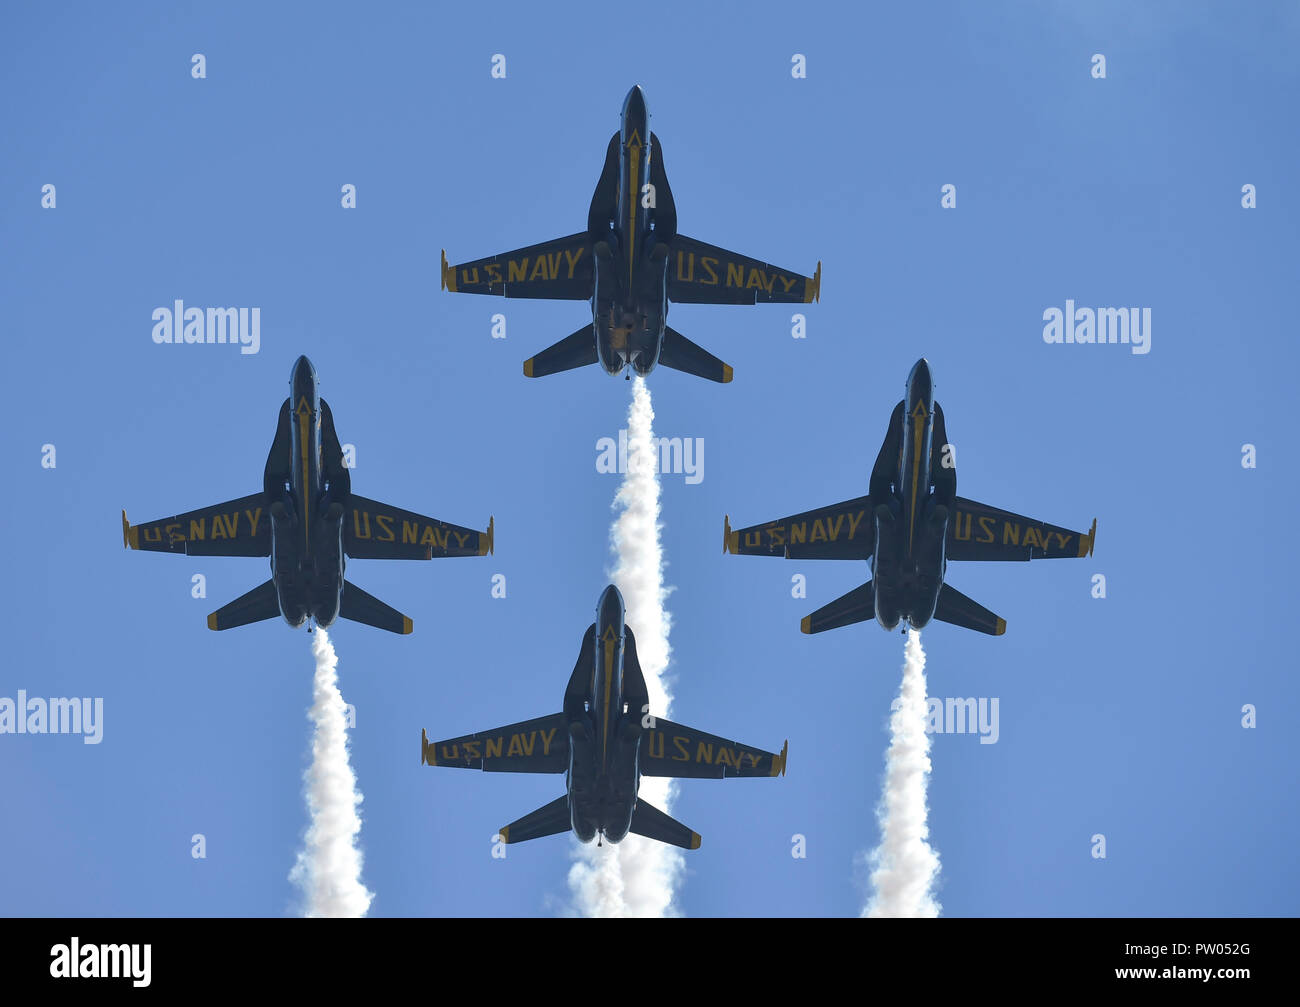 181007-N-ZC358-0372 SAN FRANCISCO (October 7, 2018) The U.S. Navy flight demonstration squadron, the Blue Angels, diamond pilots pass overhead prior to performing the Low Break Cross maneuver during the 2018 San Francisco Fleet Week Air Show. The Blue Angels are scheduled to perform more than 60 demonstrations at more than 30 locations across the U.S. and Canada in 2018. (U.S. Navy photo by Mass Communication Specialist 2nd Class Jess Gray/Released) Stock Photo